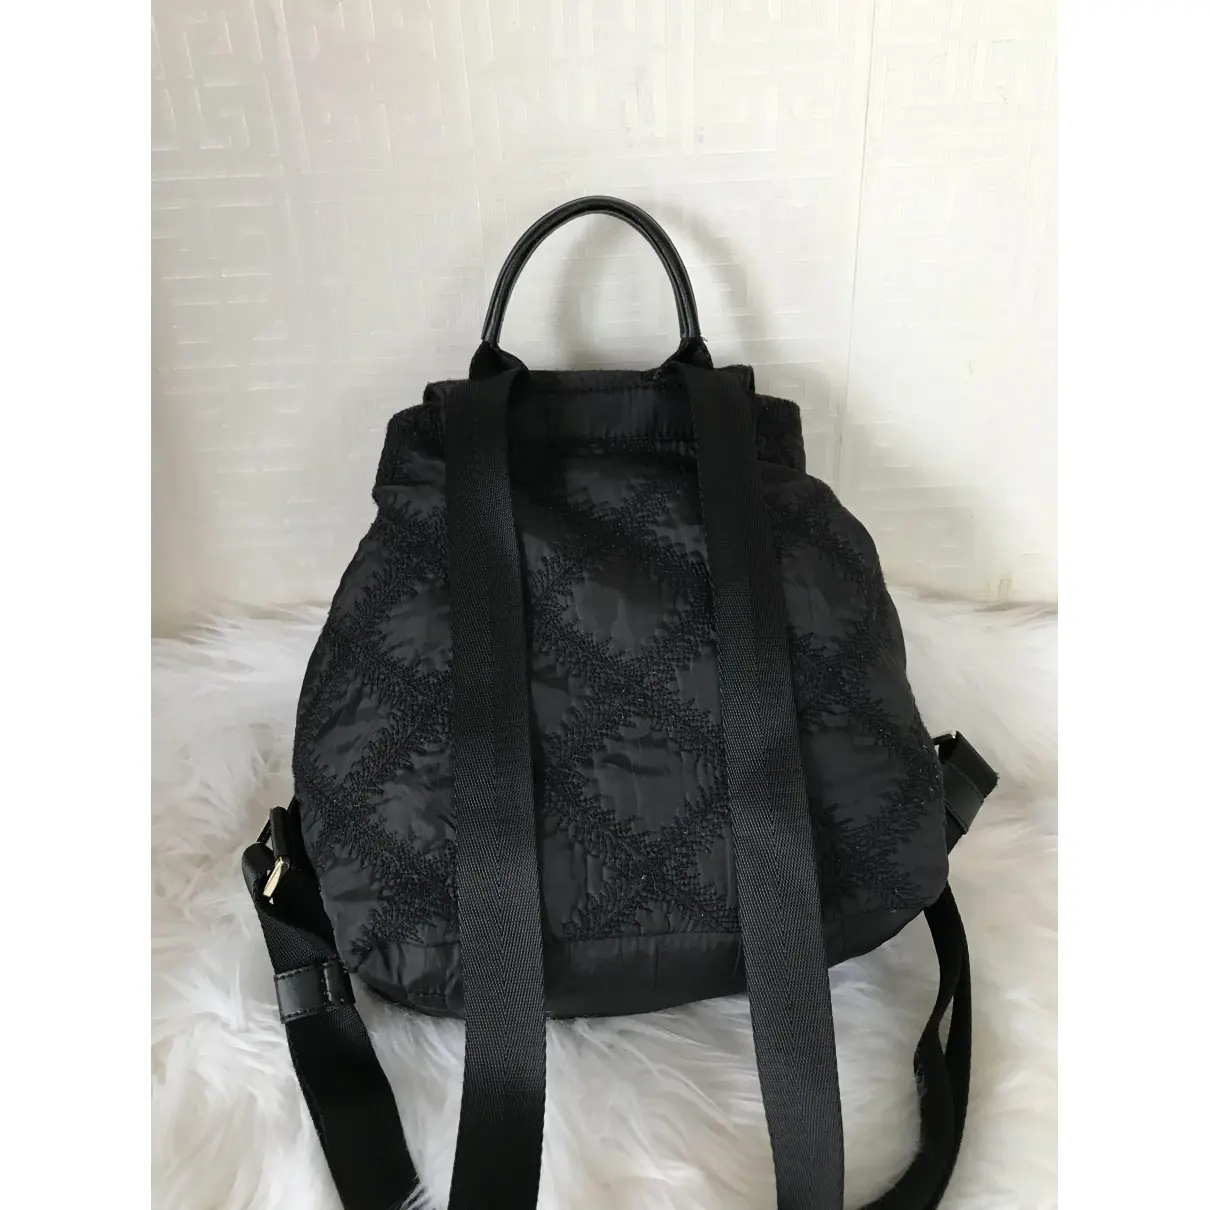 Tory Burch Cloth backpack for sale